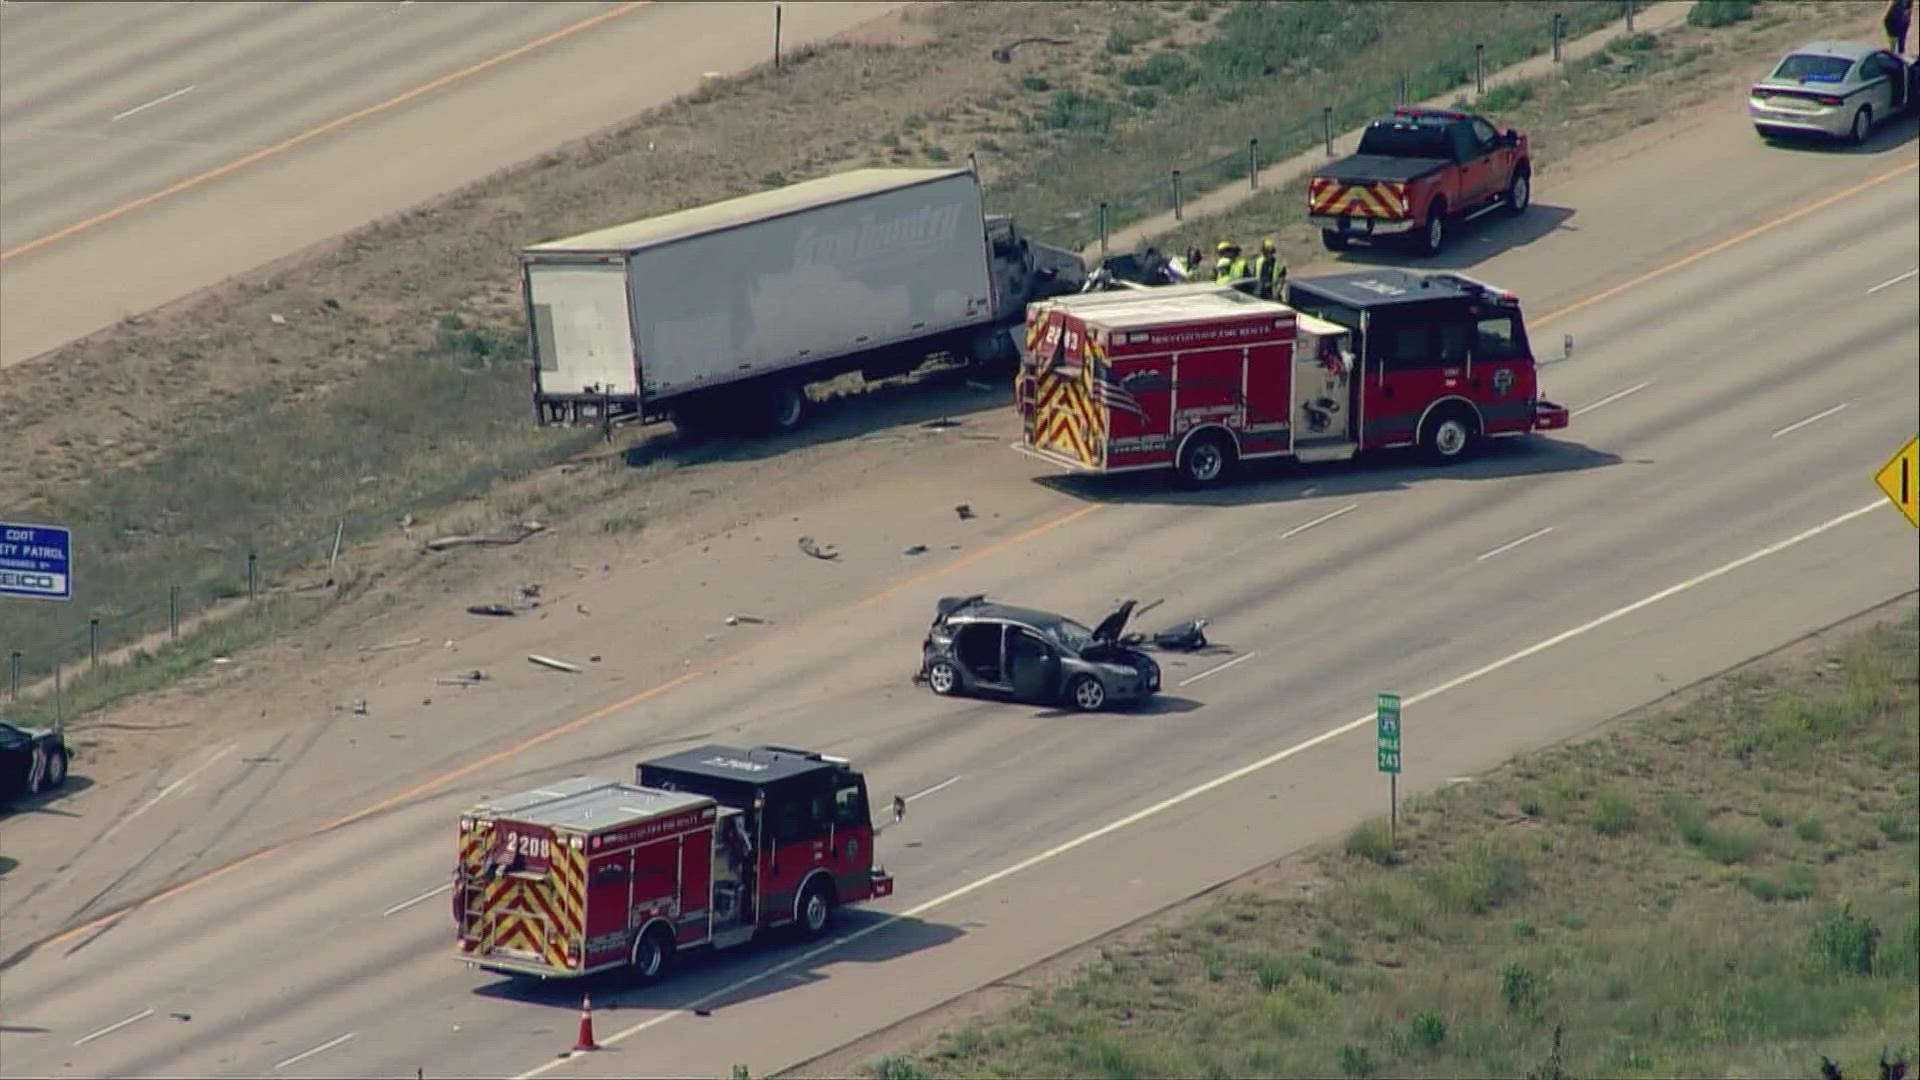 Three different crashes a left mangled mess on two different interstates across Colorado on Monday. Four people died and six others were injured.